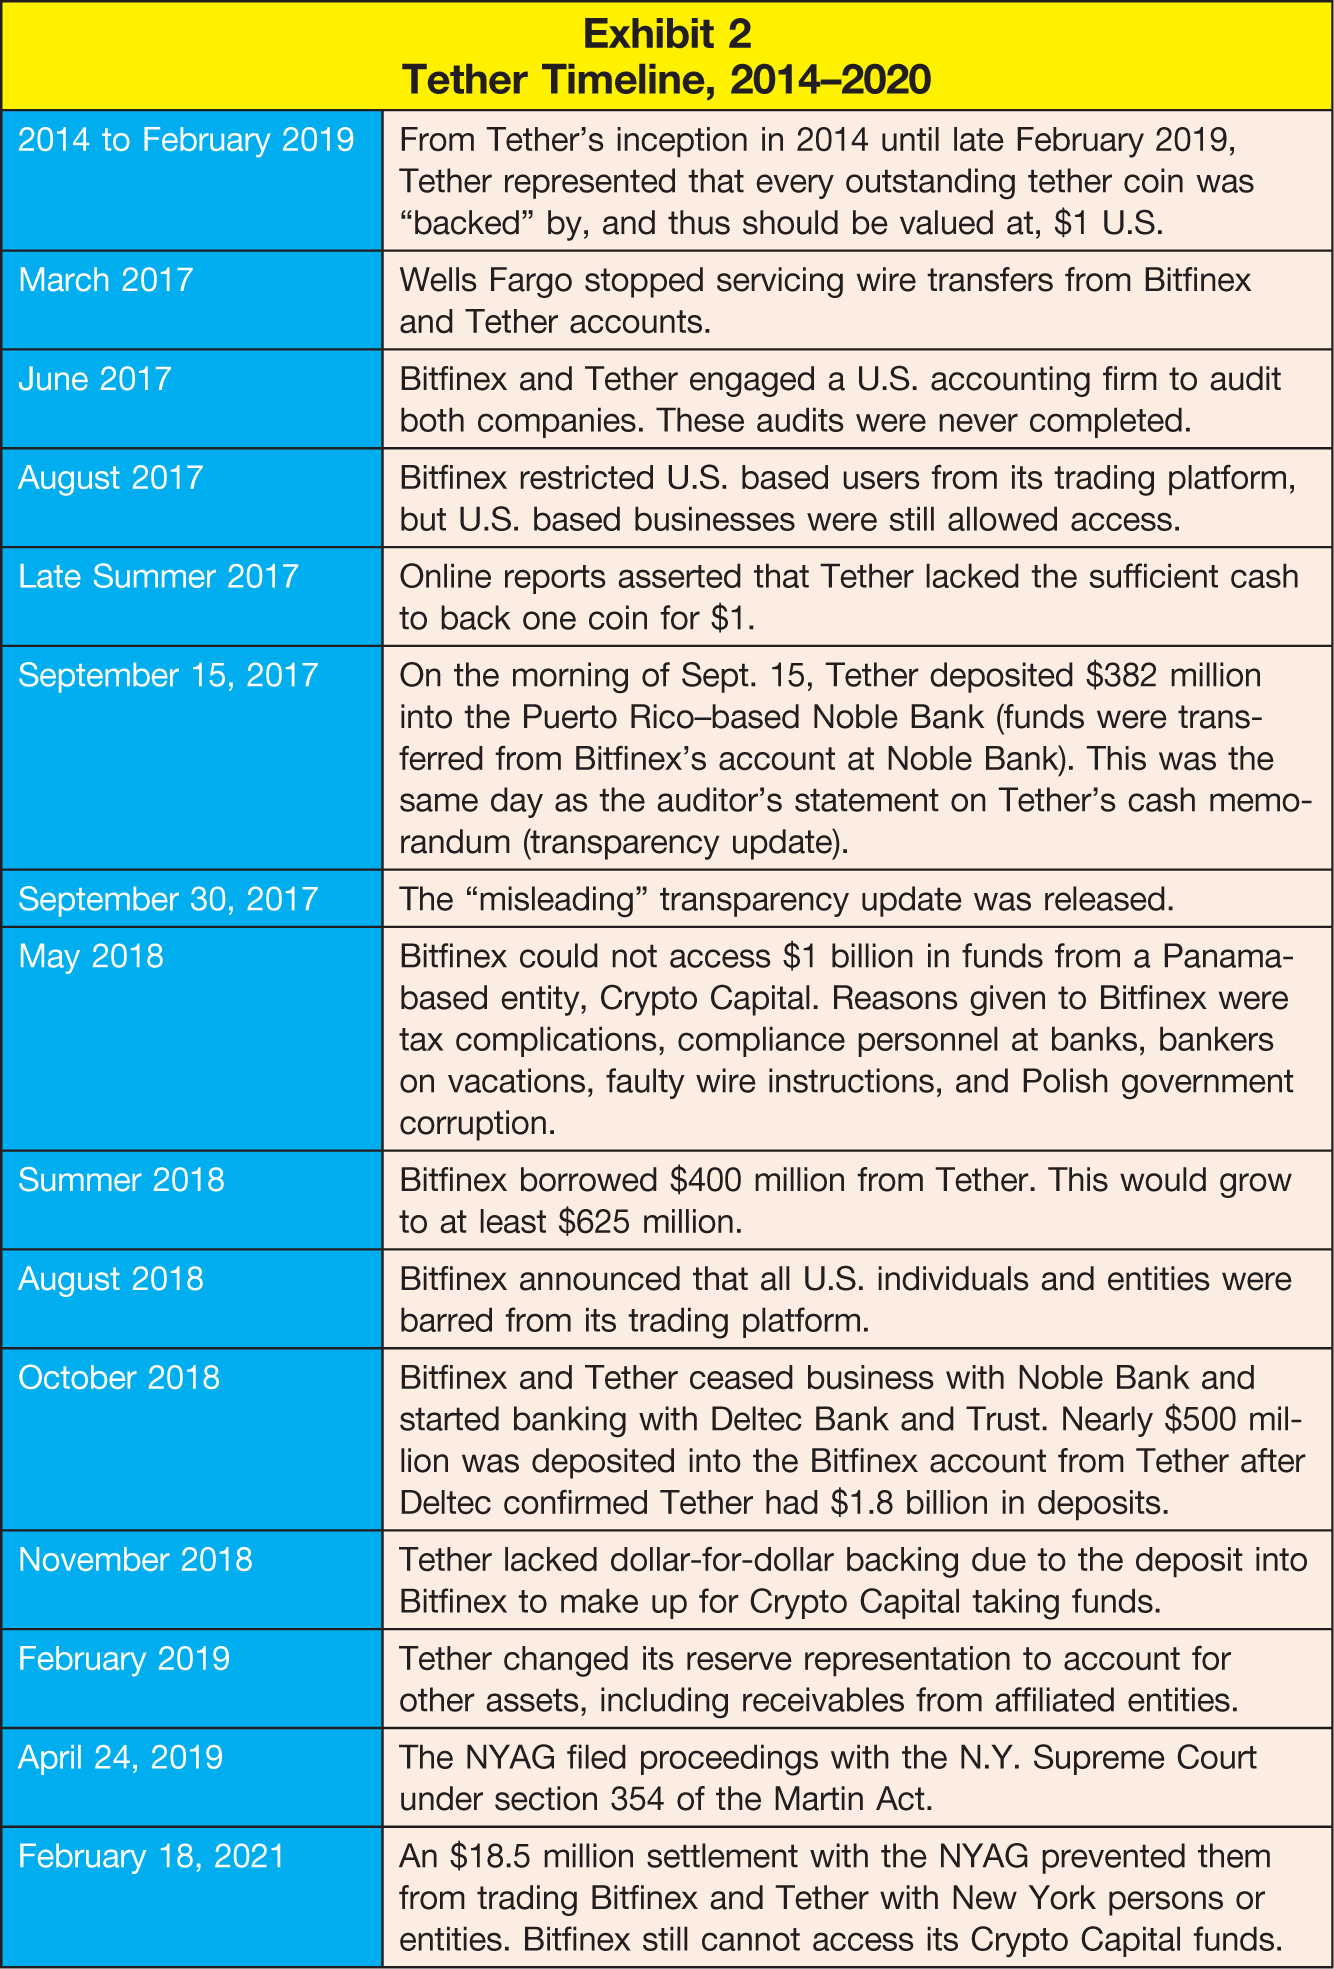  2014 to February 2019; From Tether's inception in 2014 until late February 2019, Tether represented that every outstanding tether coin was “backed” by, and thus should be valued at, $1 U.S. March 2017; Wells Fargo stopped servicing wire transfers from Bitfinex and Tether accounts. June 2017; Bitfinex and Tether engaged a U.S. accounting firm to audit both companies. These audits were never completed. August 2017; Bitfinex restricted U.S. based users from its trading platform, but U.S. based businesses were still allowed access. Late Summer 2017; Online reports asserted that Tether lacked the sufficient cash to back one coin for $1. September 15, 2017; On the morning of Sept. 15, Tether deposited $382 million into the Puerto Rico–based Noble Bank (funds were transferred from Bitfinex's account at Noble Bank). This was the same day as the auditor's statement on Tether's cash memorandum (transparency update). September 30, 2017; The “misleading” transparency update was released. May 2018; Bitfinex could not access $1 billion in funds from a Panama-based entity, Crypto Capital. Reasons given to Bitfinex were tax complications, compliance personnel at banks, bankers on vacations, faulty wire instructions, and Polish government corruption. Summer 2018; Bitfinex borrowed $400 million from Tether. This would grow to at least $625 million. August 2018; Bitfinex announced that all U.S. individuals and entities were barred from its trading platform. October 2018; Bitfinex and Tether ceased business with Noble Bank and started banking with Deltec Bank and Trust. Nearly $500 million was deposited into the Bitfinex account from Tether after Deltec confirmed Tether had $1.8 billion in deposits. November 2018; Tether lacked dollar-for-dollar backing due to the deposit into Bitfinex to make up for Crypto Capital taking funds. February 2019; Tether changed its reserve representation to account for other assets, including receivables from affiliated entities. April 24, 2019; The NYAG filed proceedings with the N.Y. Supreme Court under section 354 of the Martin Act. February 18, 2021; An $18.5 million settlement with the NYAG prevented them from trading Bitfinex and Tether with New York persons or entities. Bitfinex still cannot access its Crypto Capital funds. 